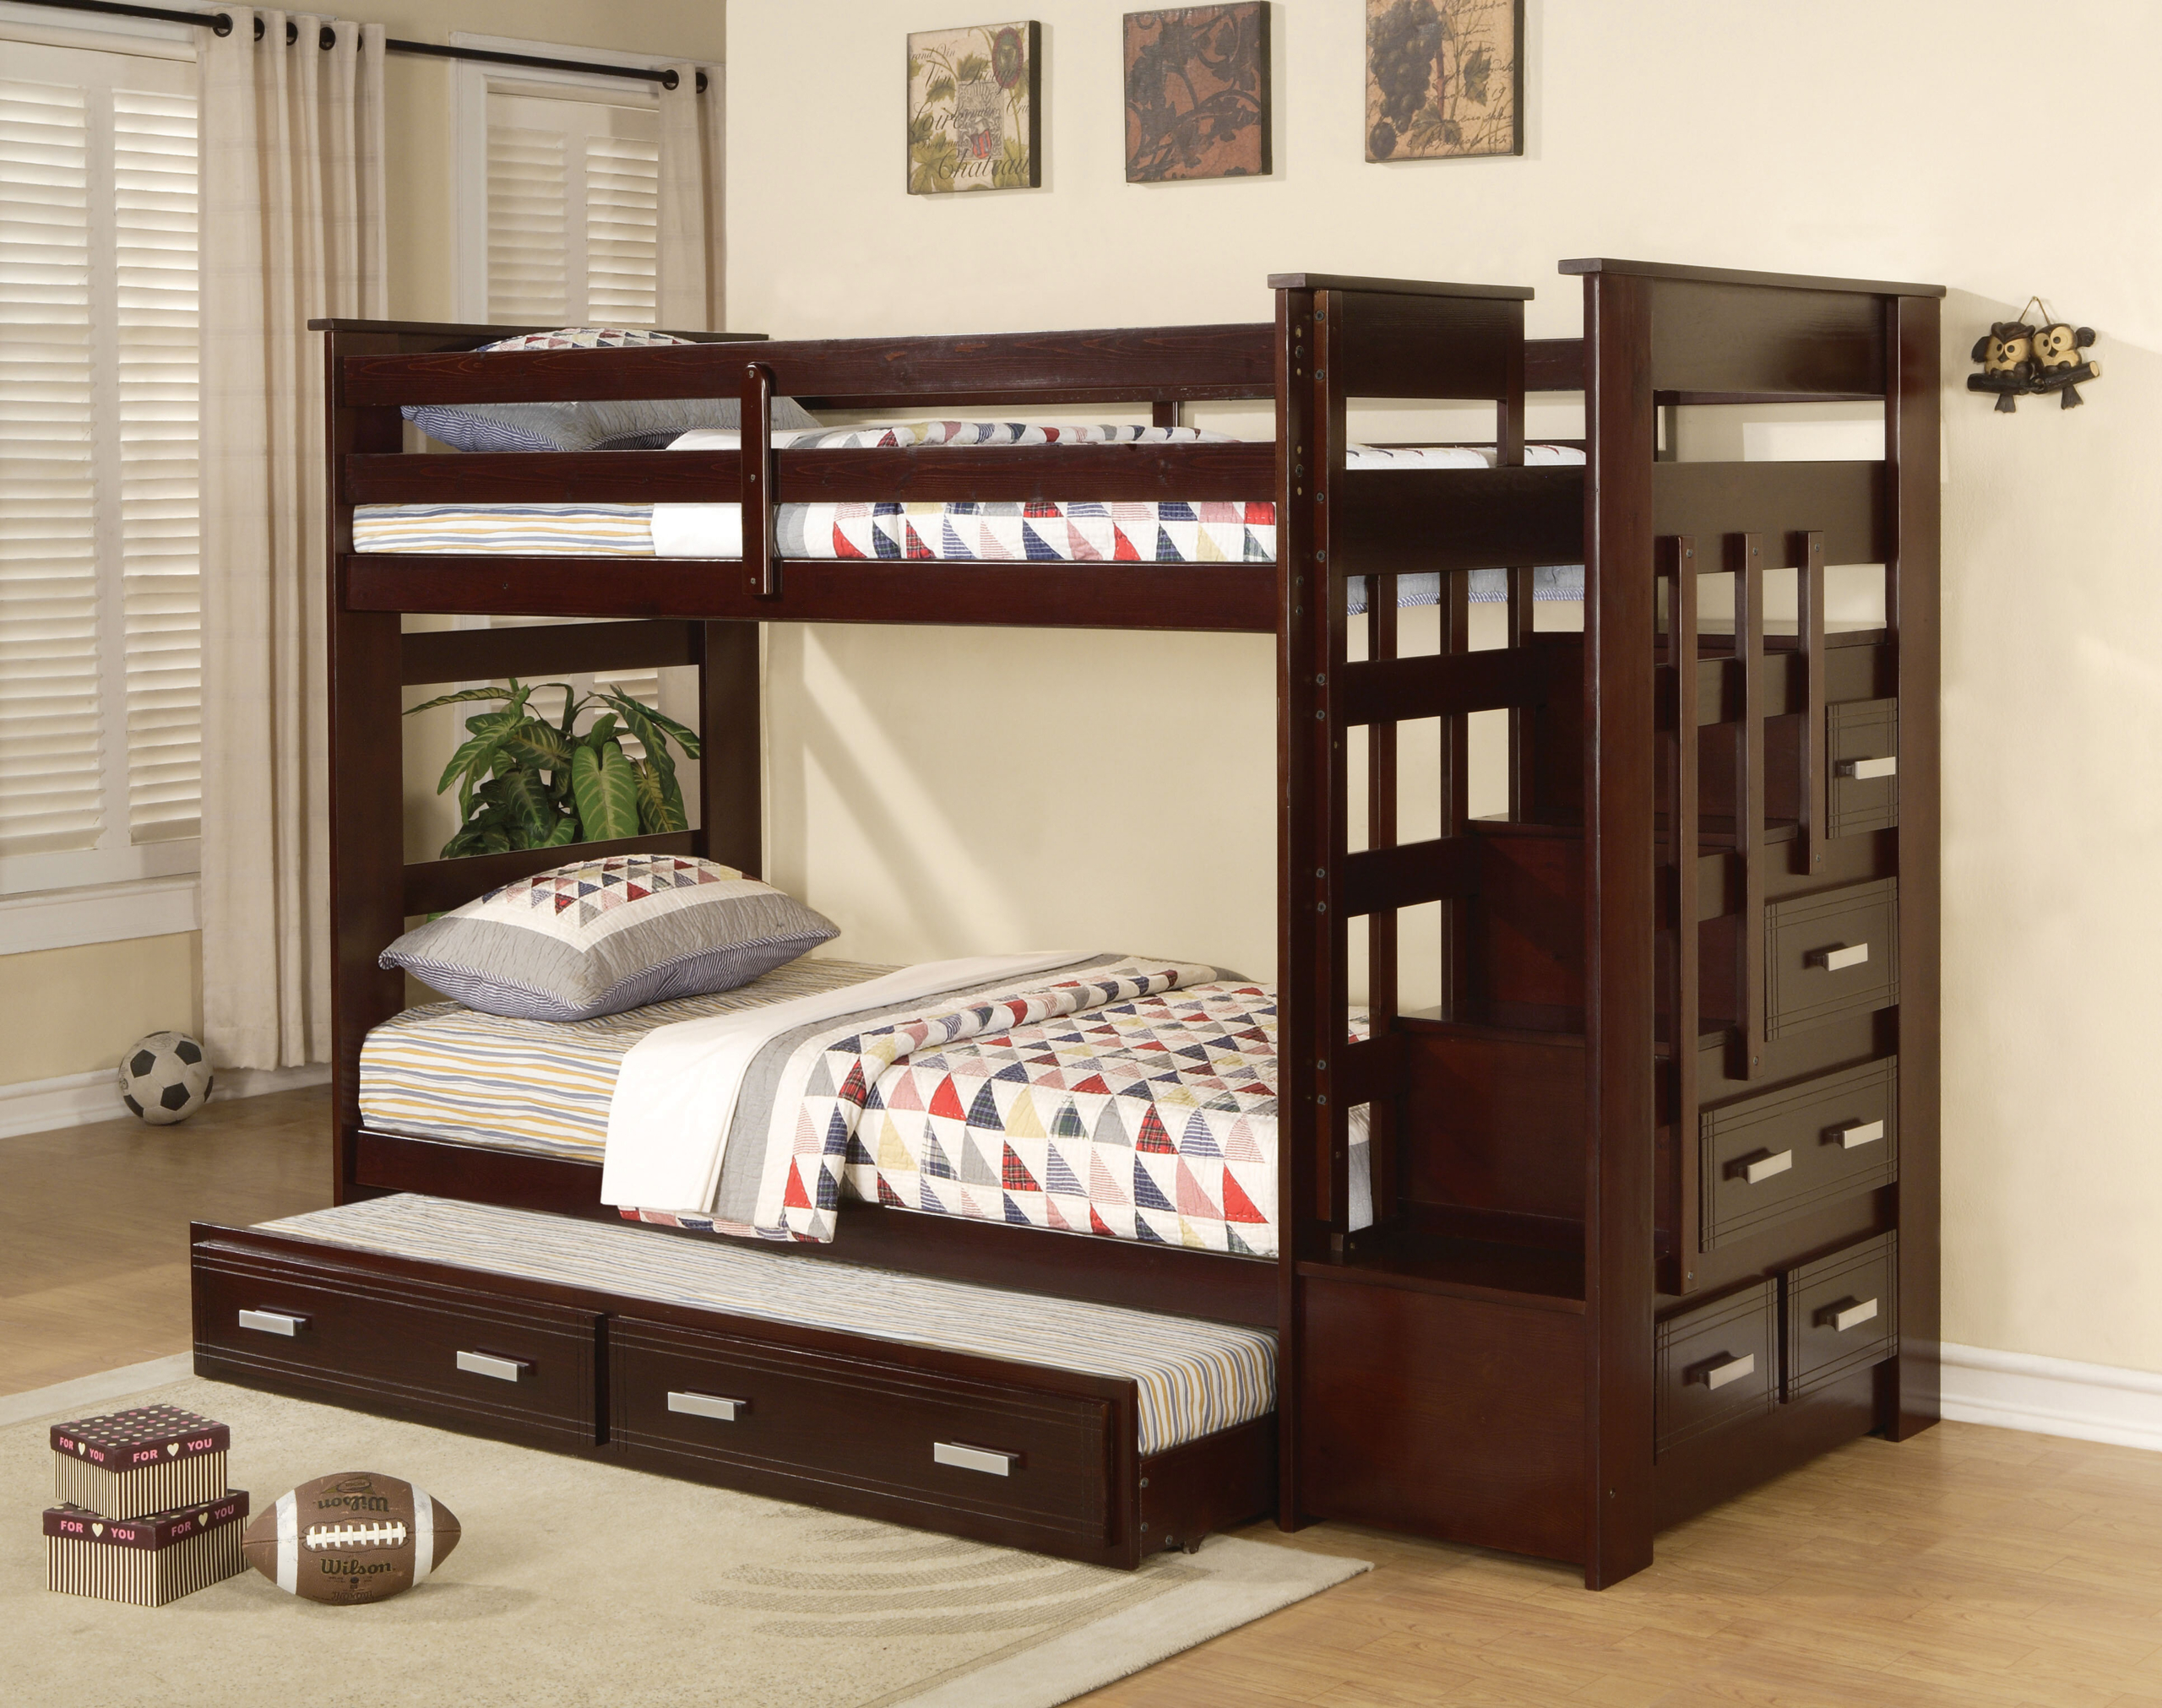 Acme 10170 Allentown Twin/Twin Bunk Bed with Storage Drawers and Trundle, Espresso Finish